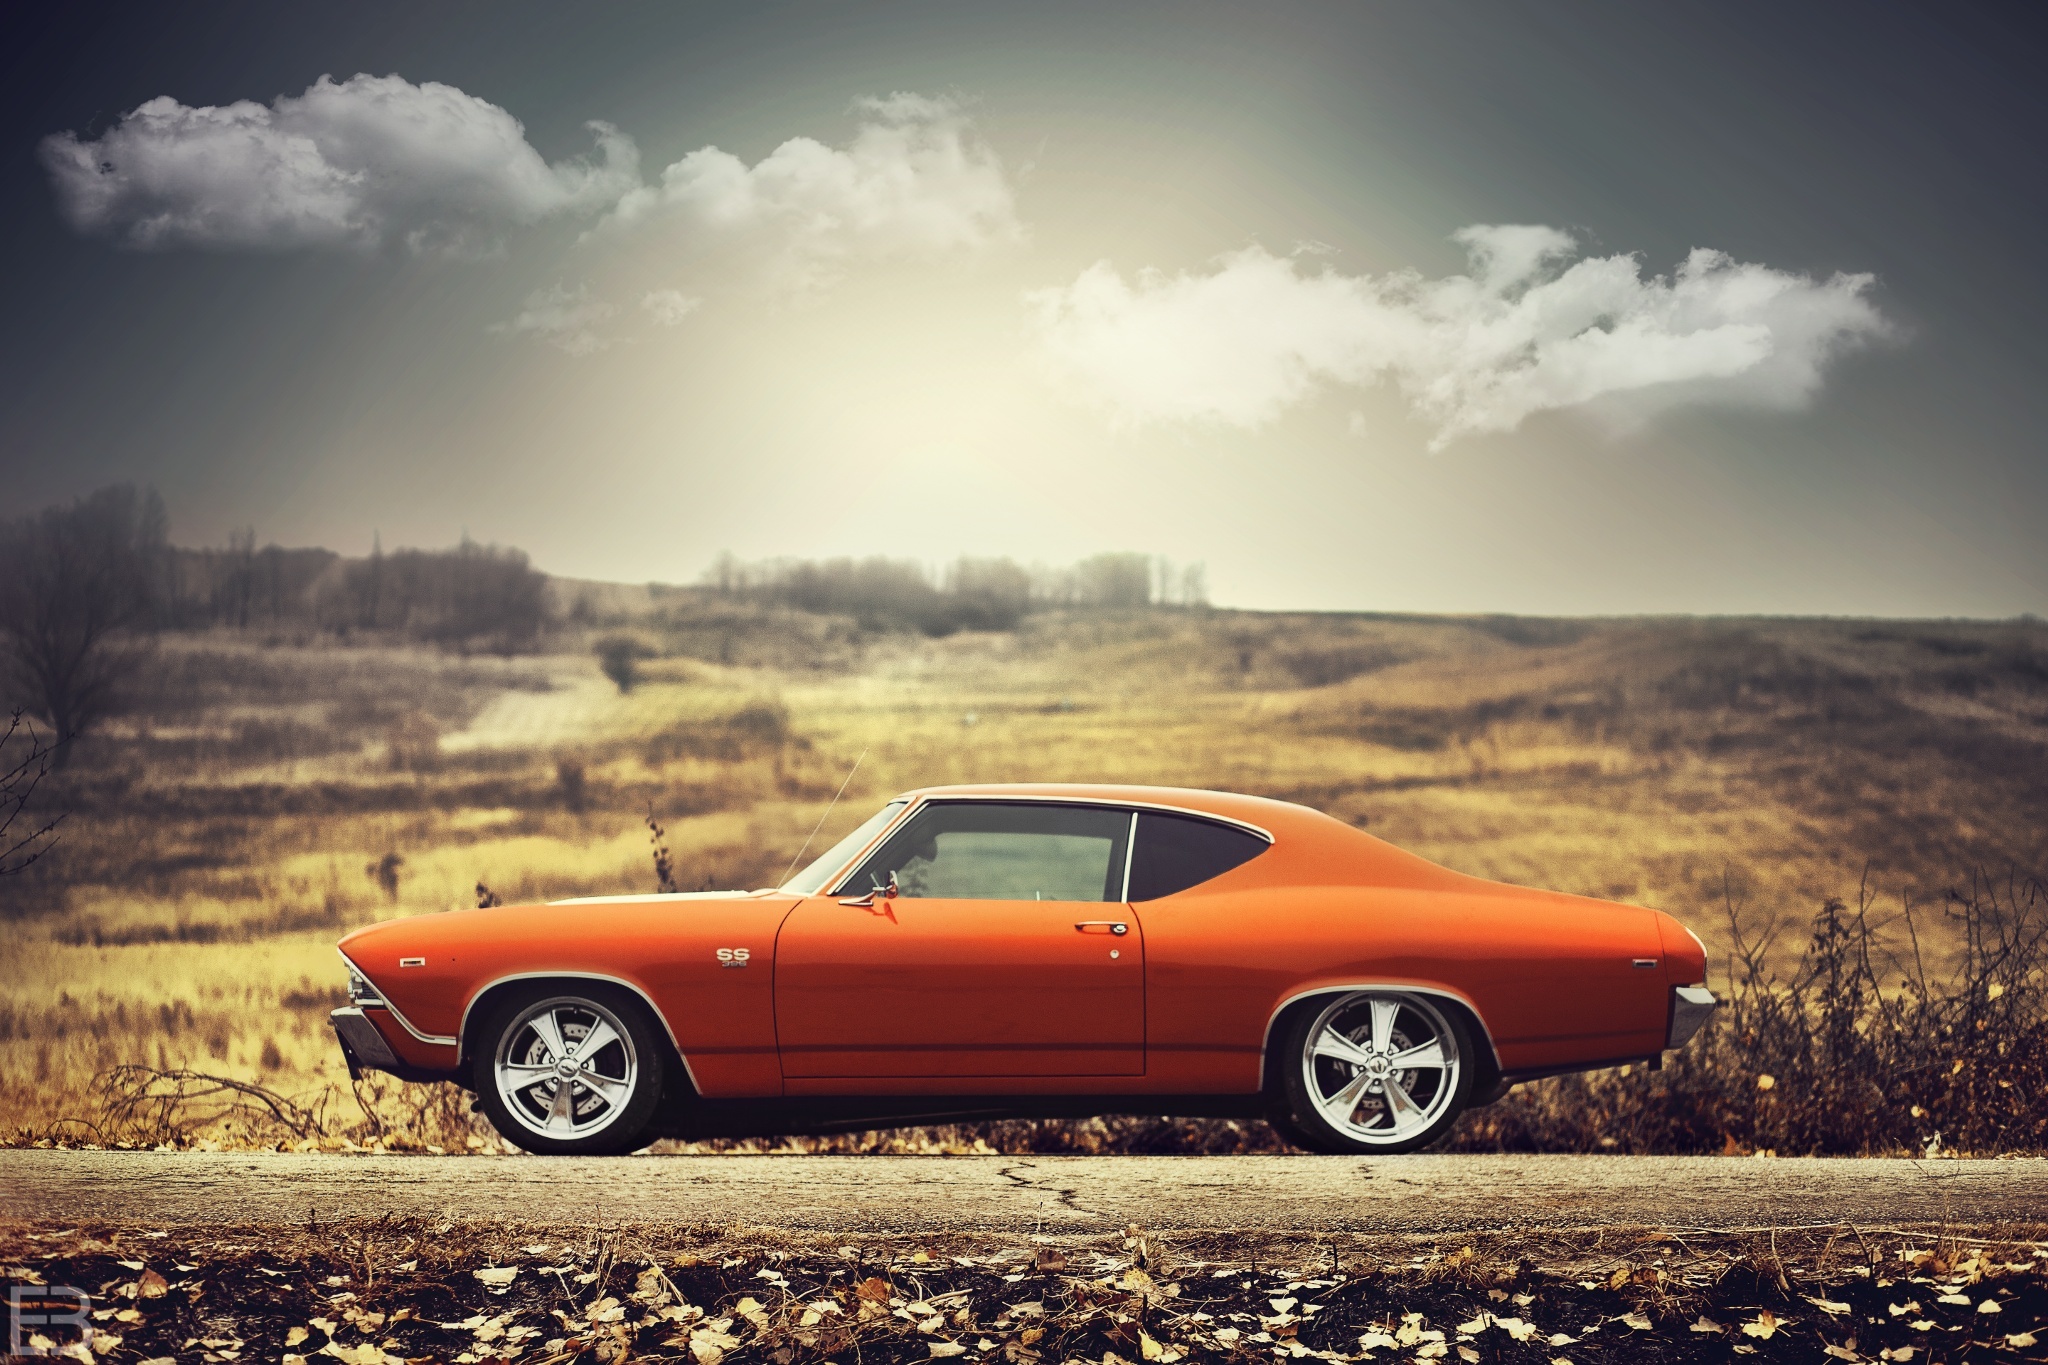 muscle car, vehicles, chevrolet chevelle ss, chevrolet chevelle, chevrolet, orange car Aesthetic wallpaper